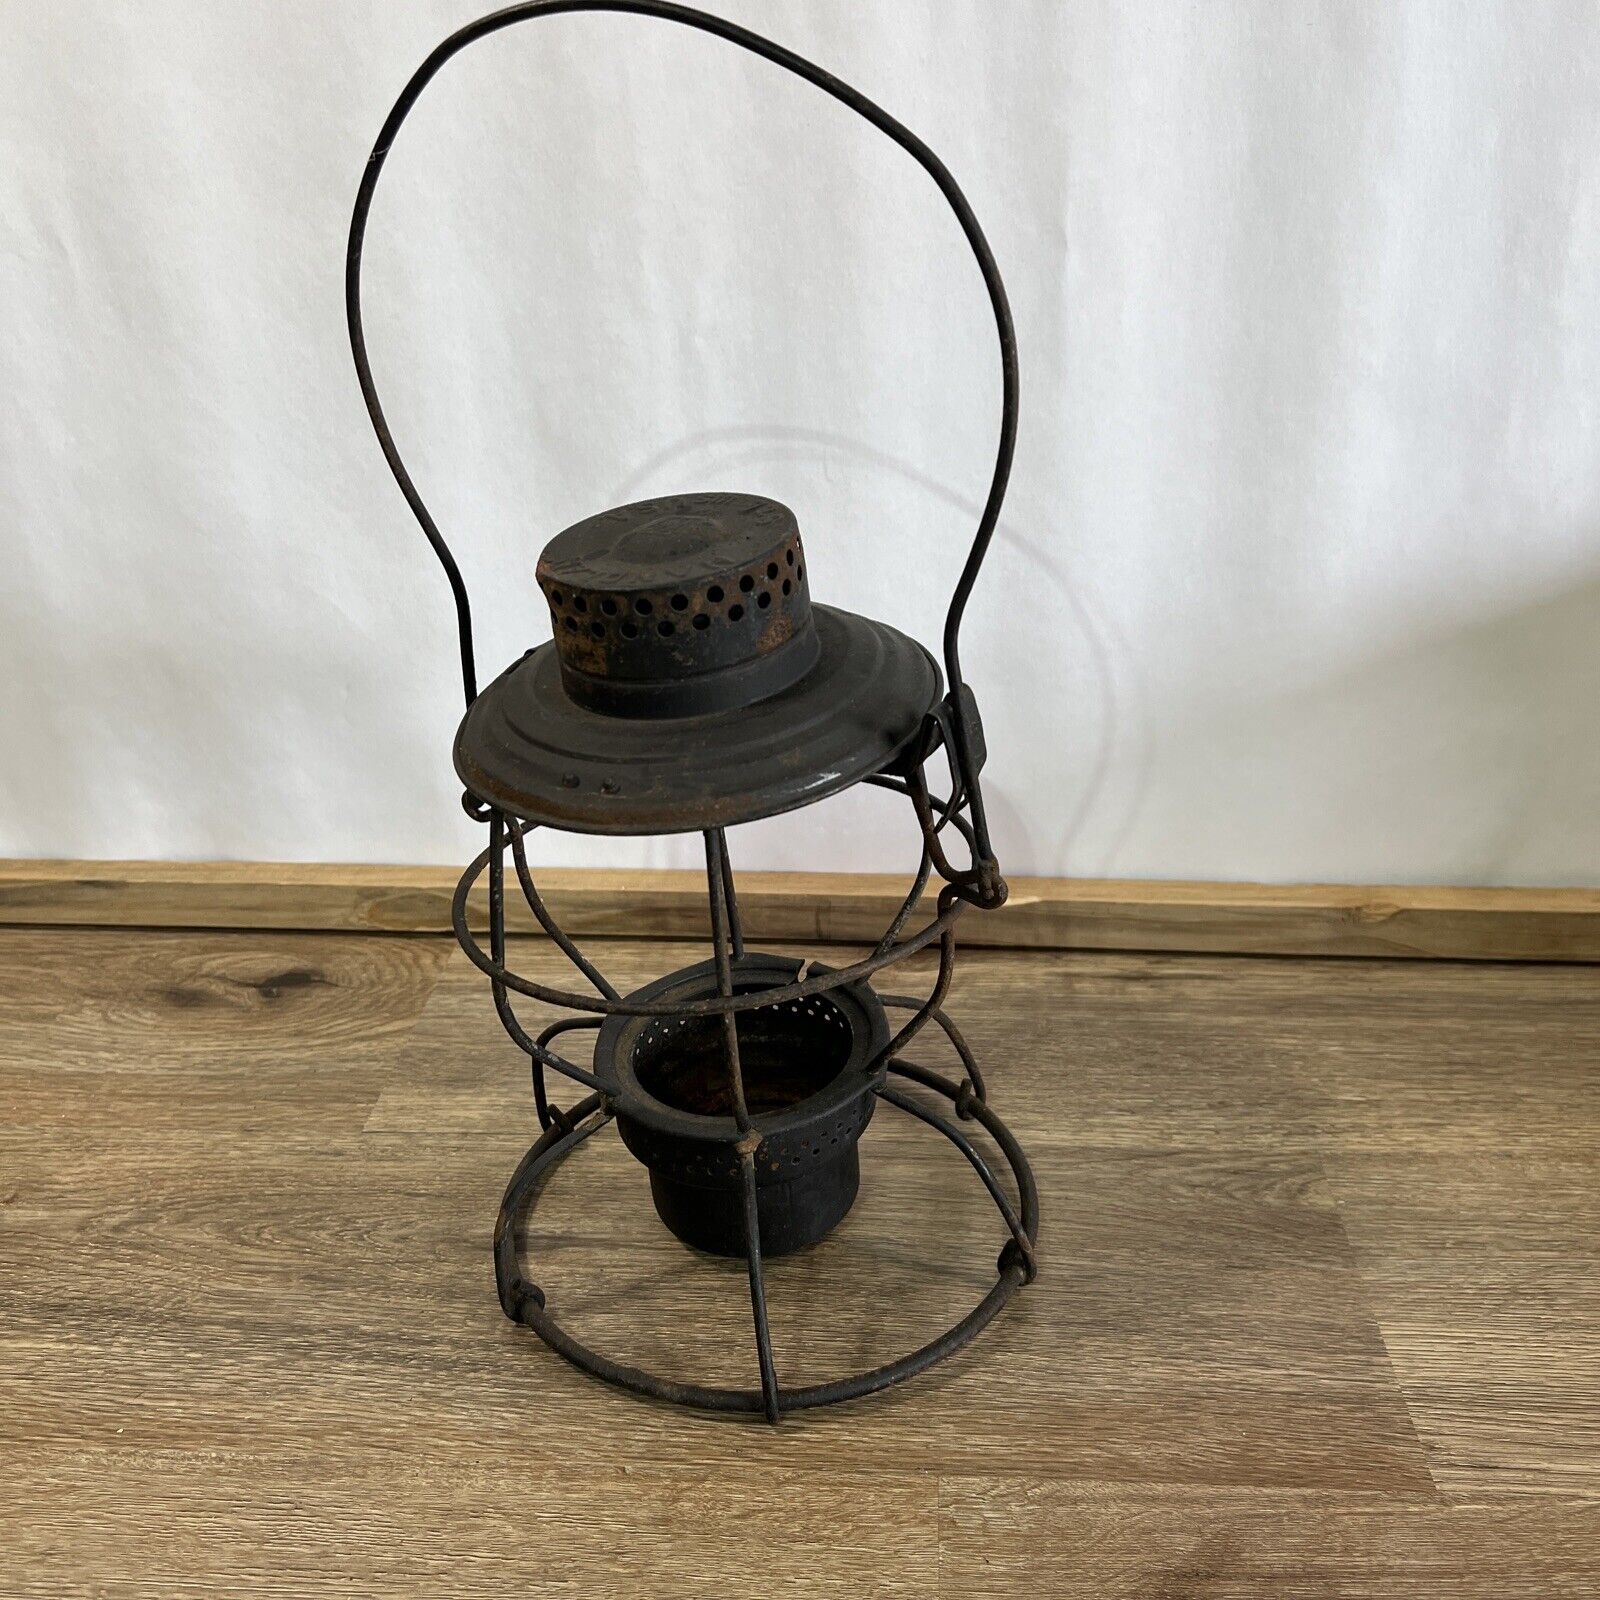 Handlan St Louis Railroad Lantern - Missing glass and canister